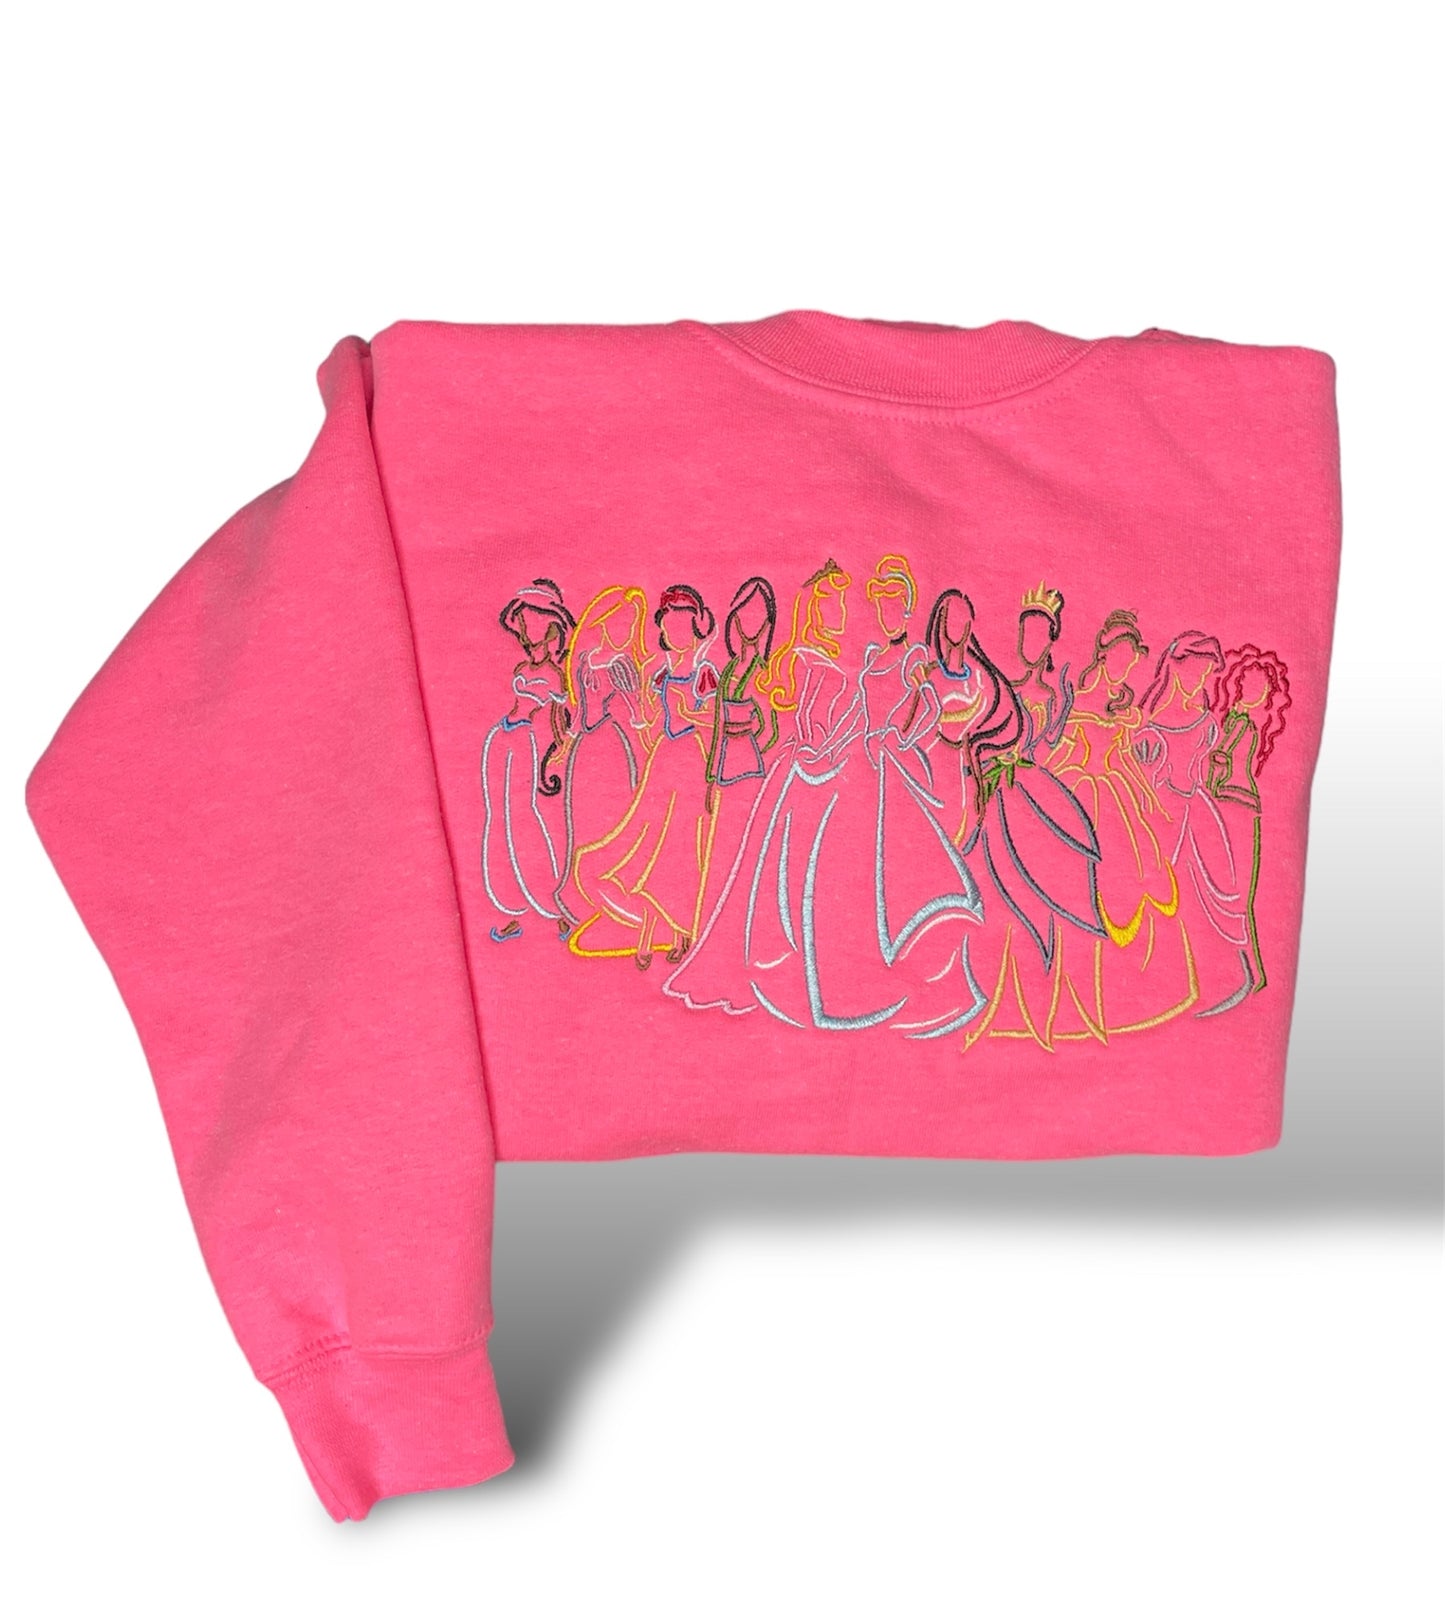 Youth Sweatshirt with Embroidered Enchanting Princesses Design